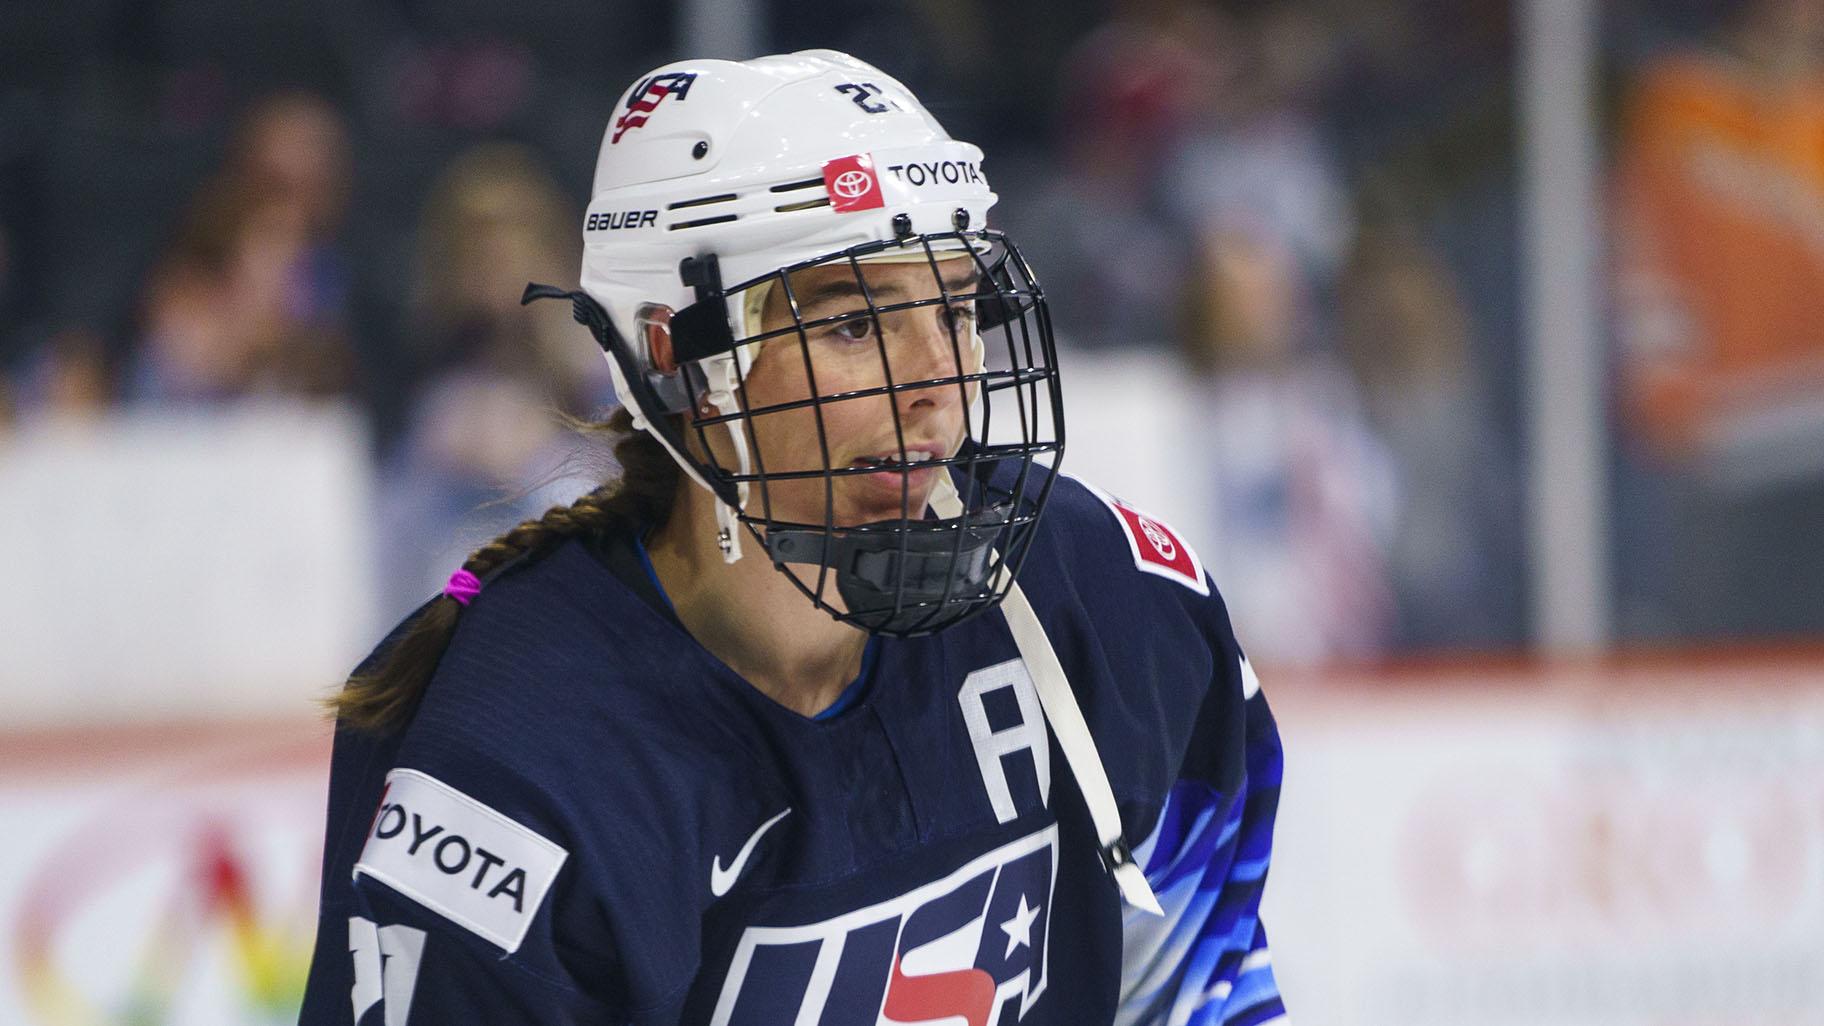 United States’ Hilary Knight looks on before a women’s hockey game against the Canada, Oct. 22, 2021, in Allentown, Pa. (AP Photo / Chris Szagola, File)